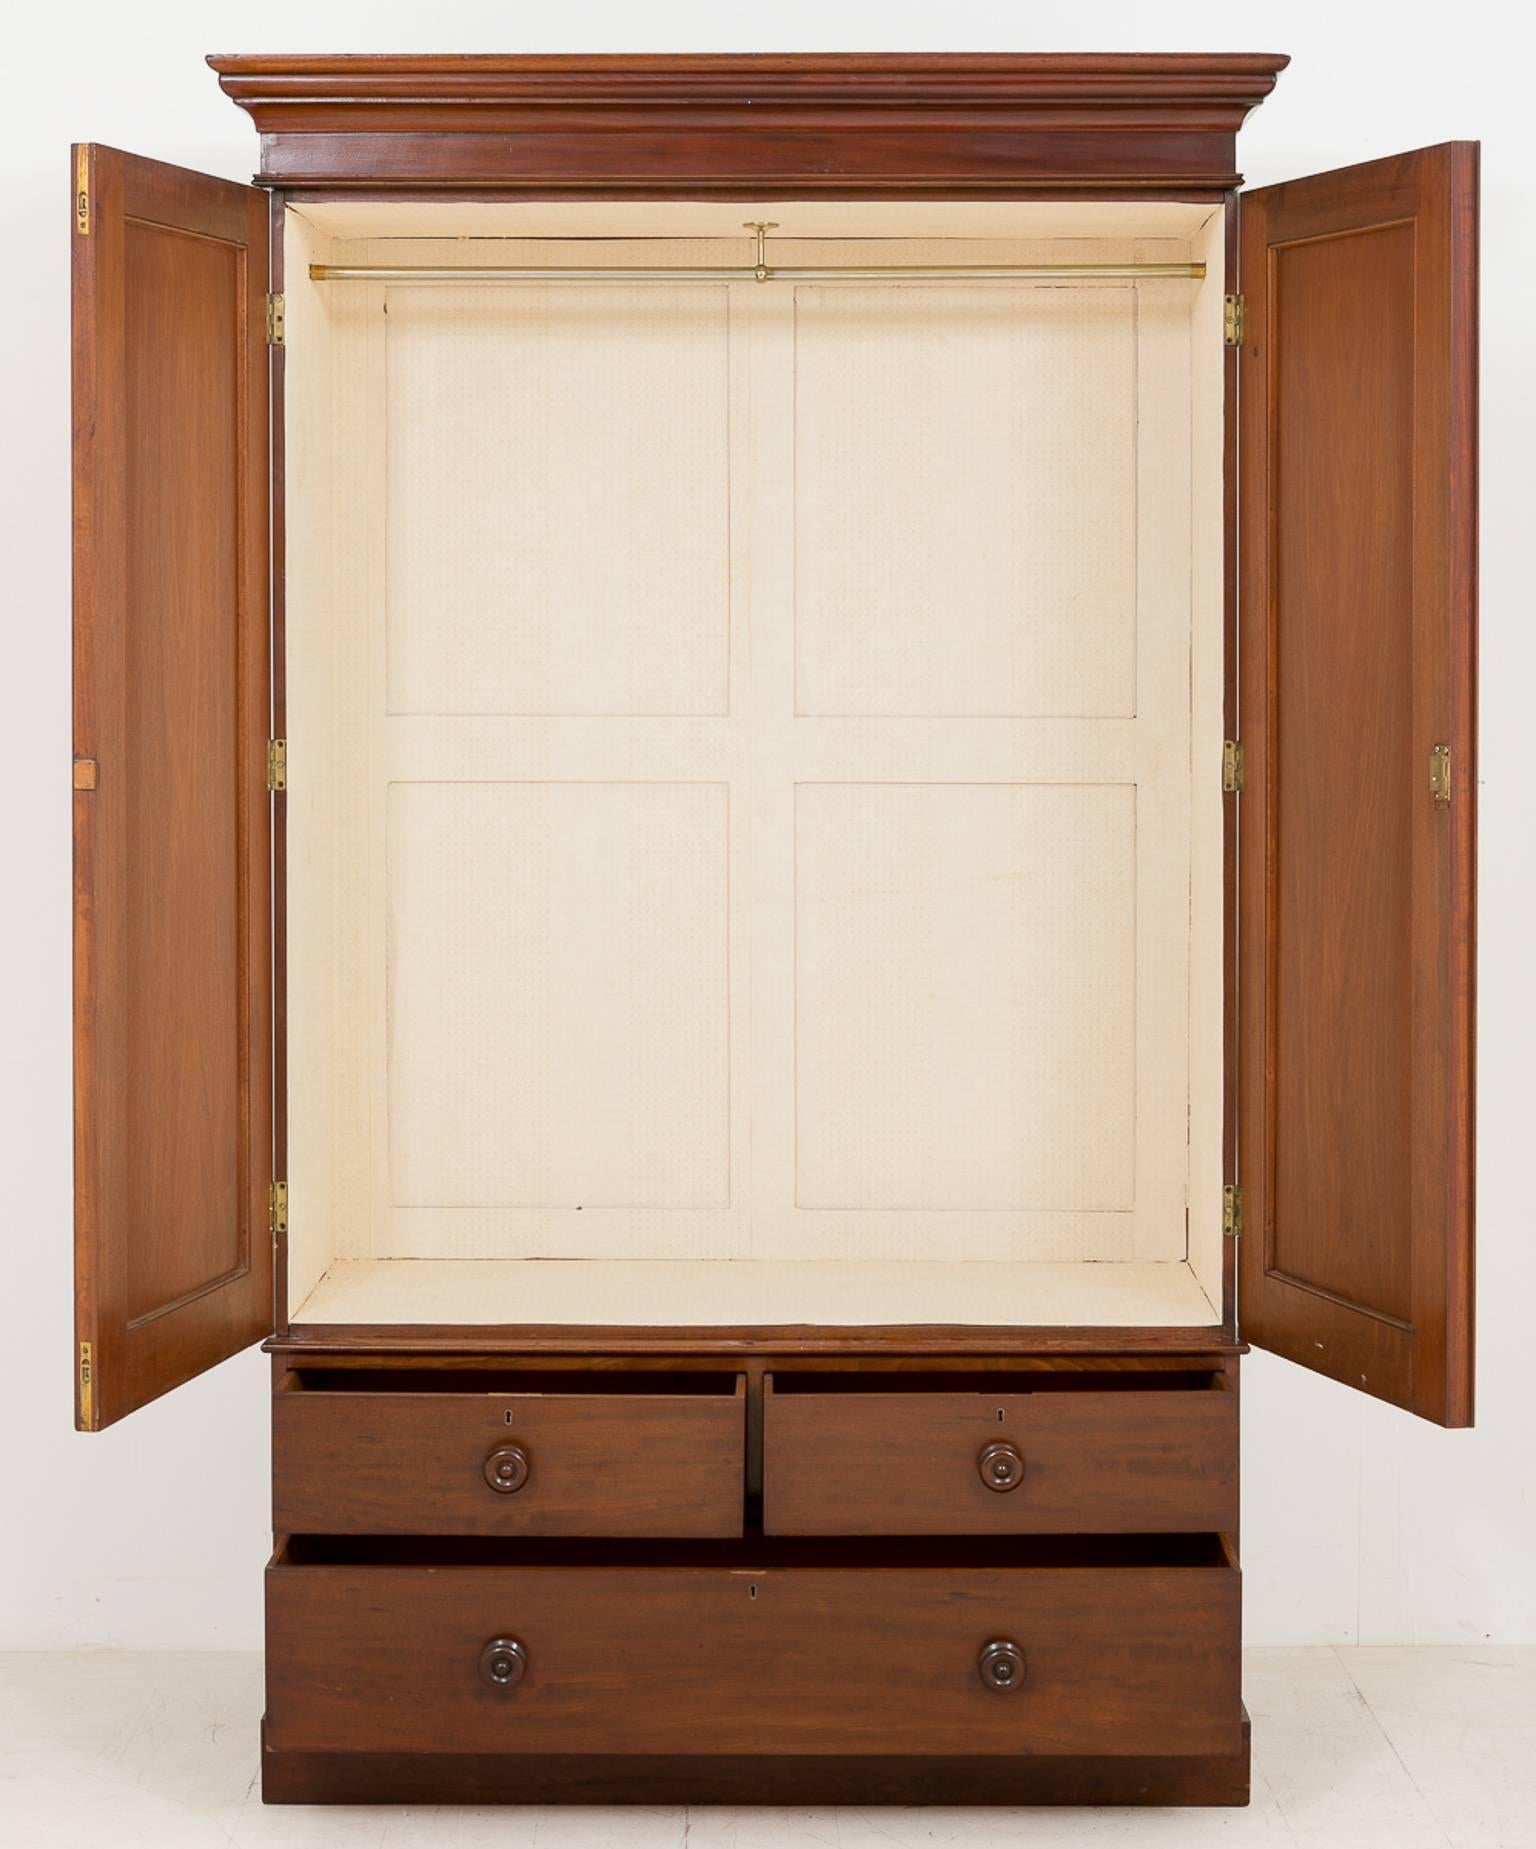 Mid-Victorian two-door mahogany wardrobe.
Standing on a plinth base with three deep drawers above.
Having two arched doors with good quality panels.
The interior is paper lined with hanging space.
This piece will break down into three